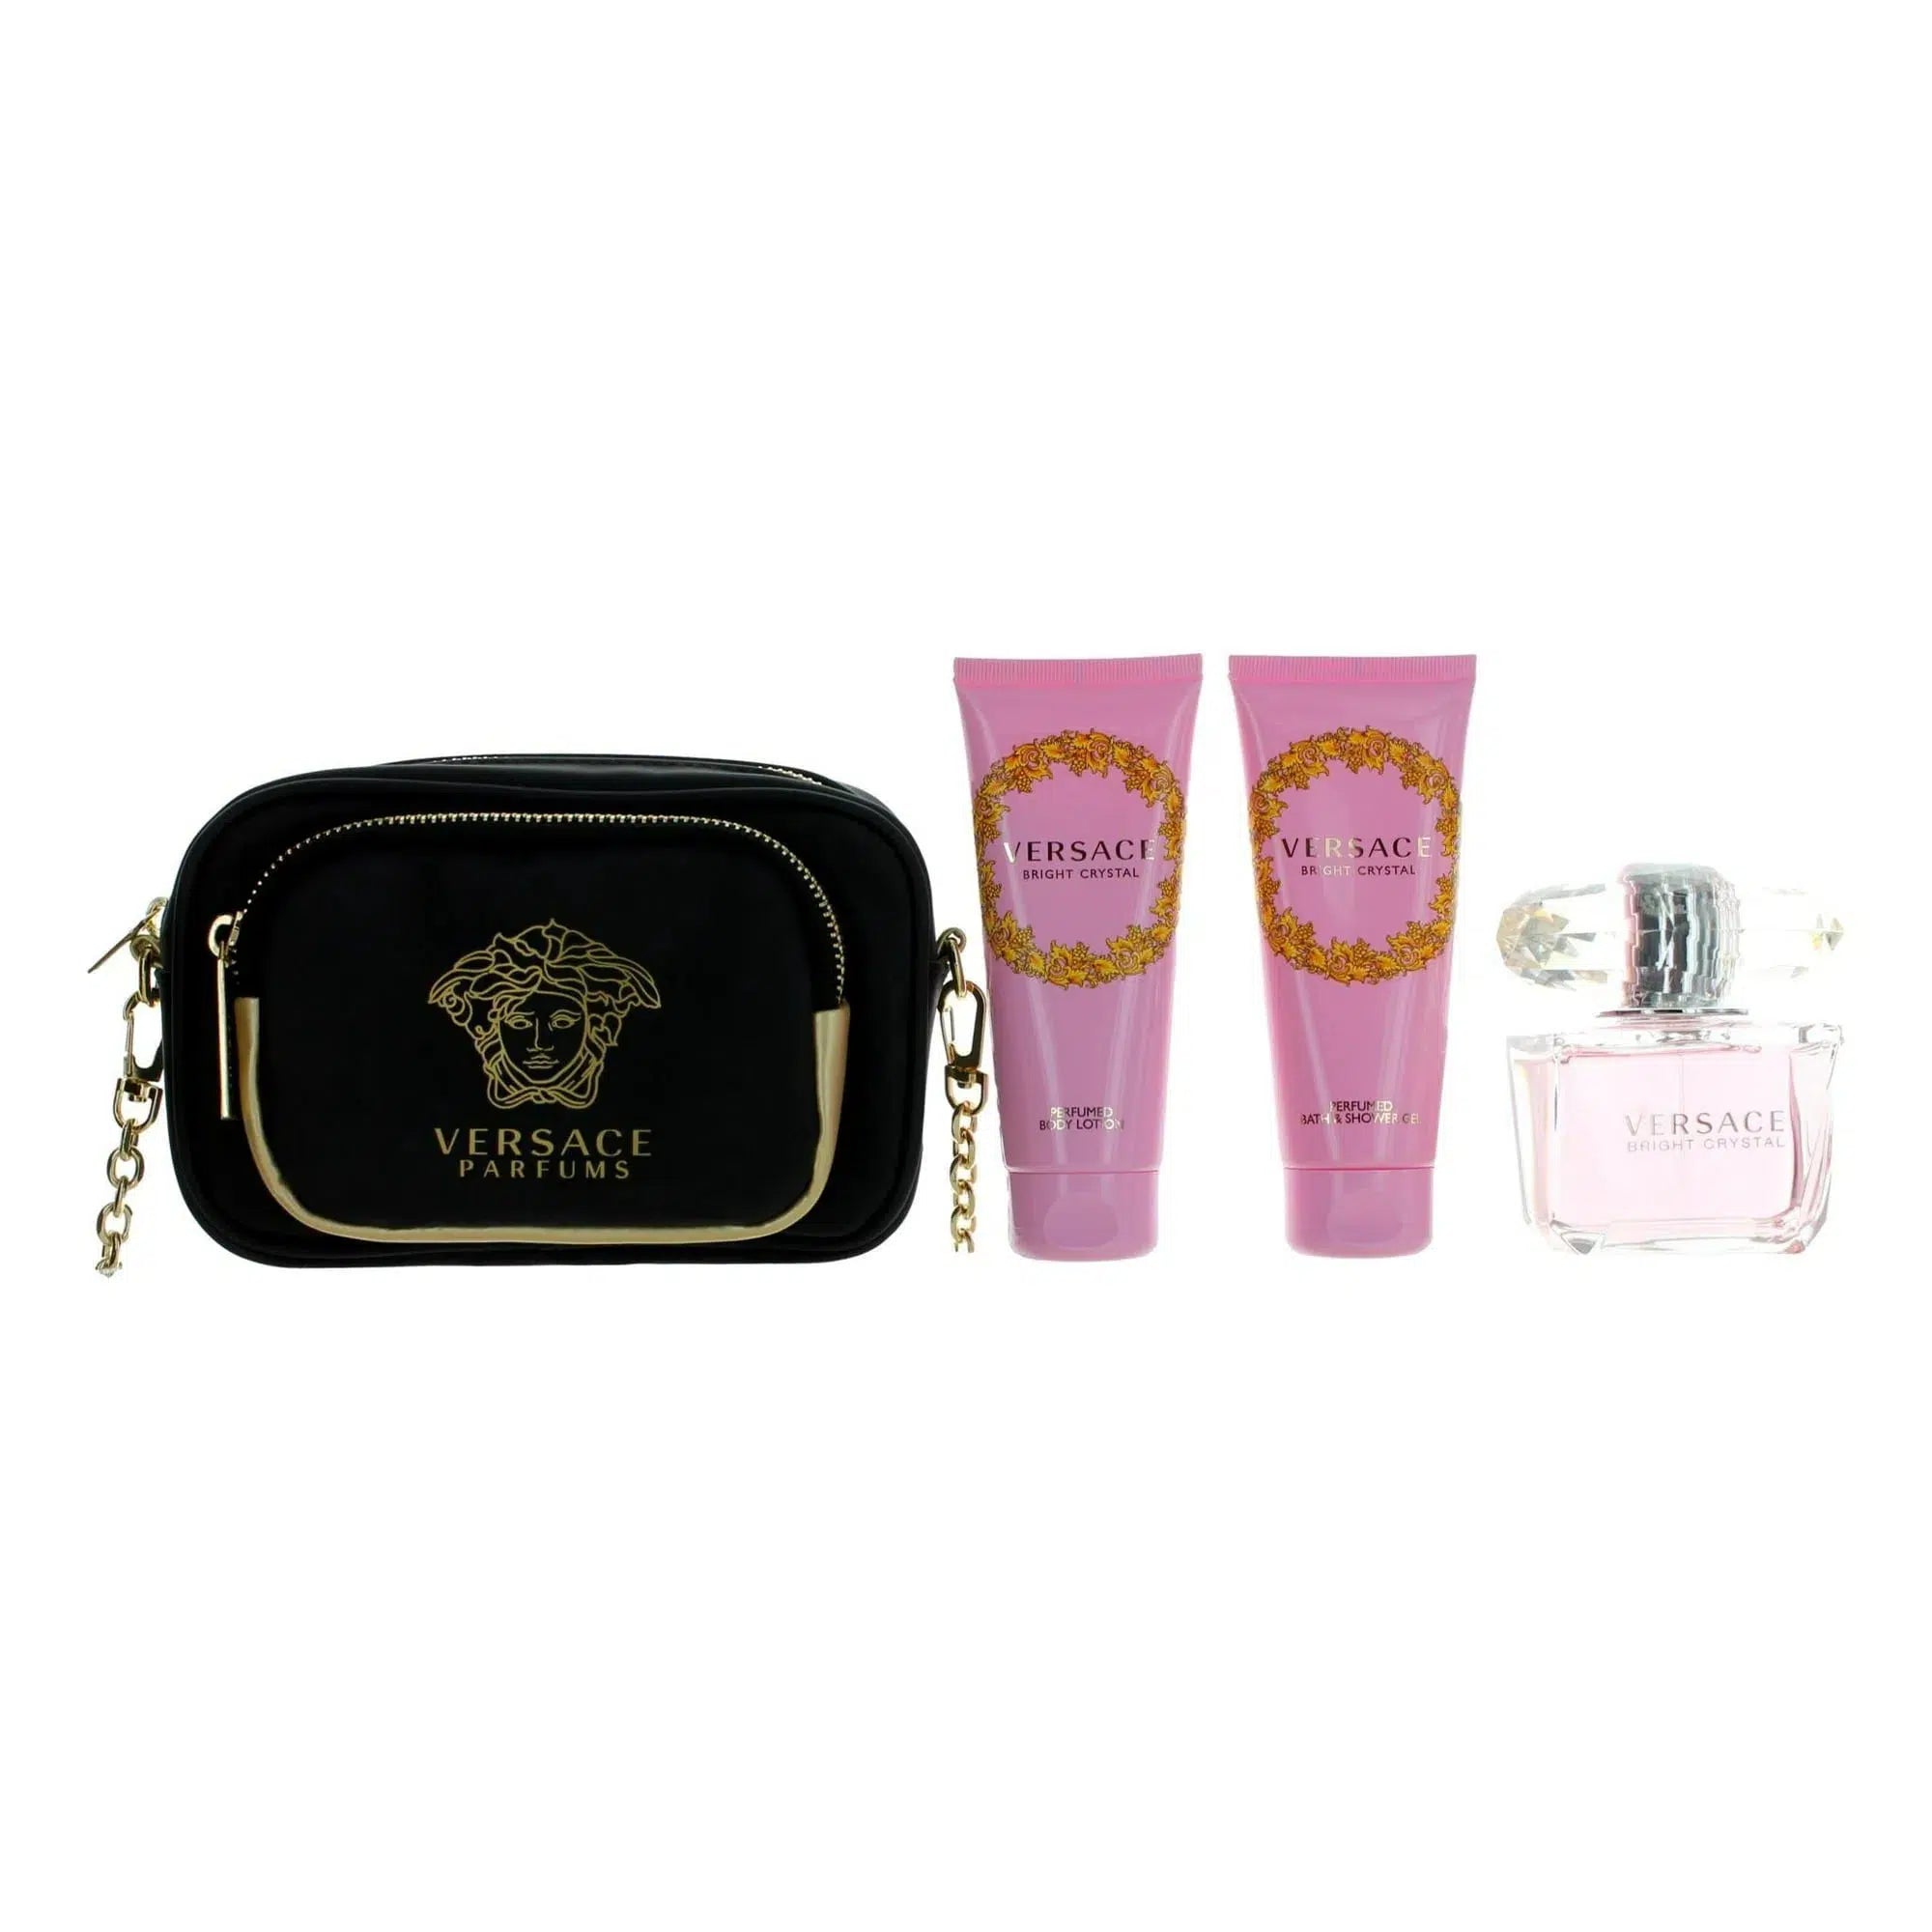 Versace Bright Crystal 3-Piece with Versace Clutch Gift Set for Women